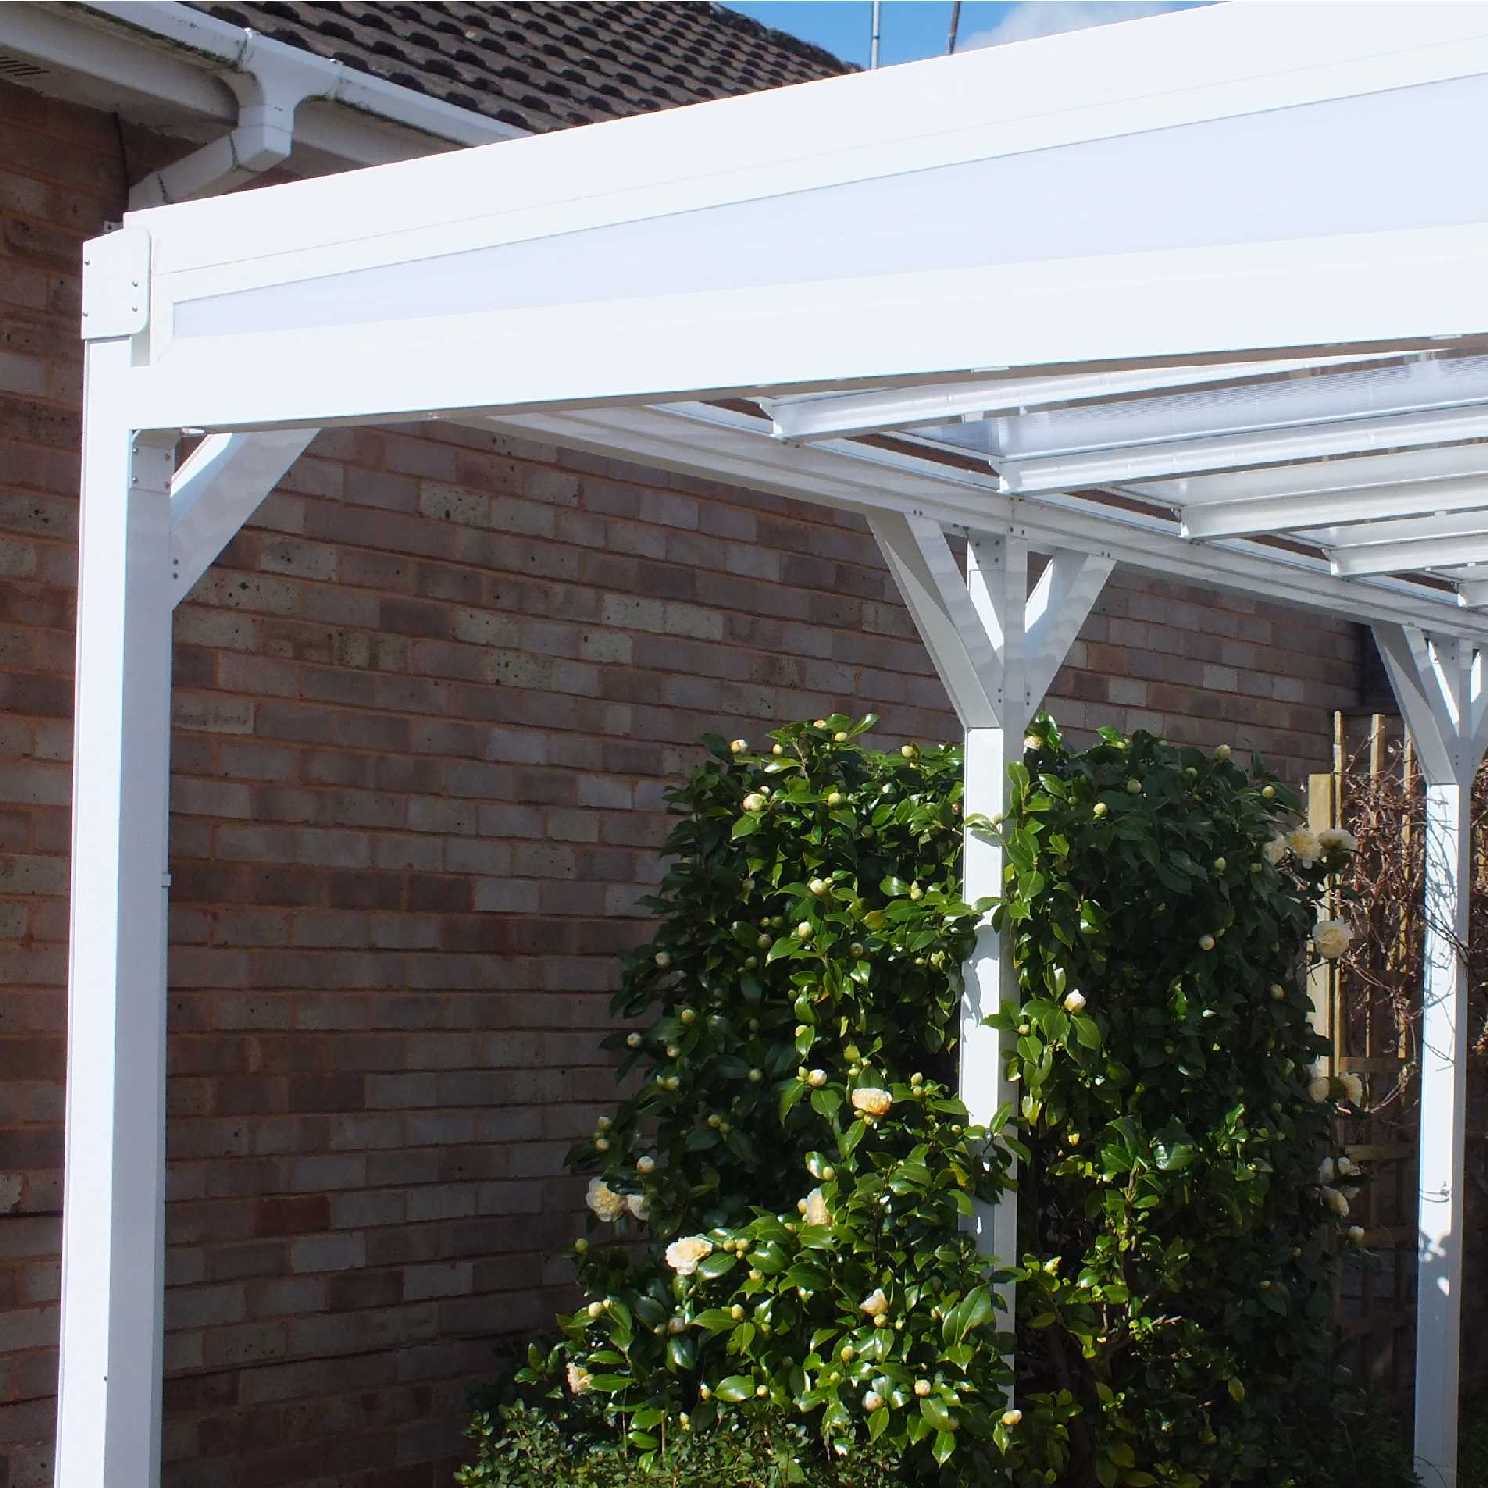 Omega Smart Lean-To Canopy, White with 16mm Polycarbonate Glazing - 8.0m (W) x 4.5m (P), (4) Supporting Posts from Omega Build